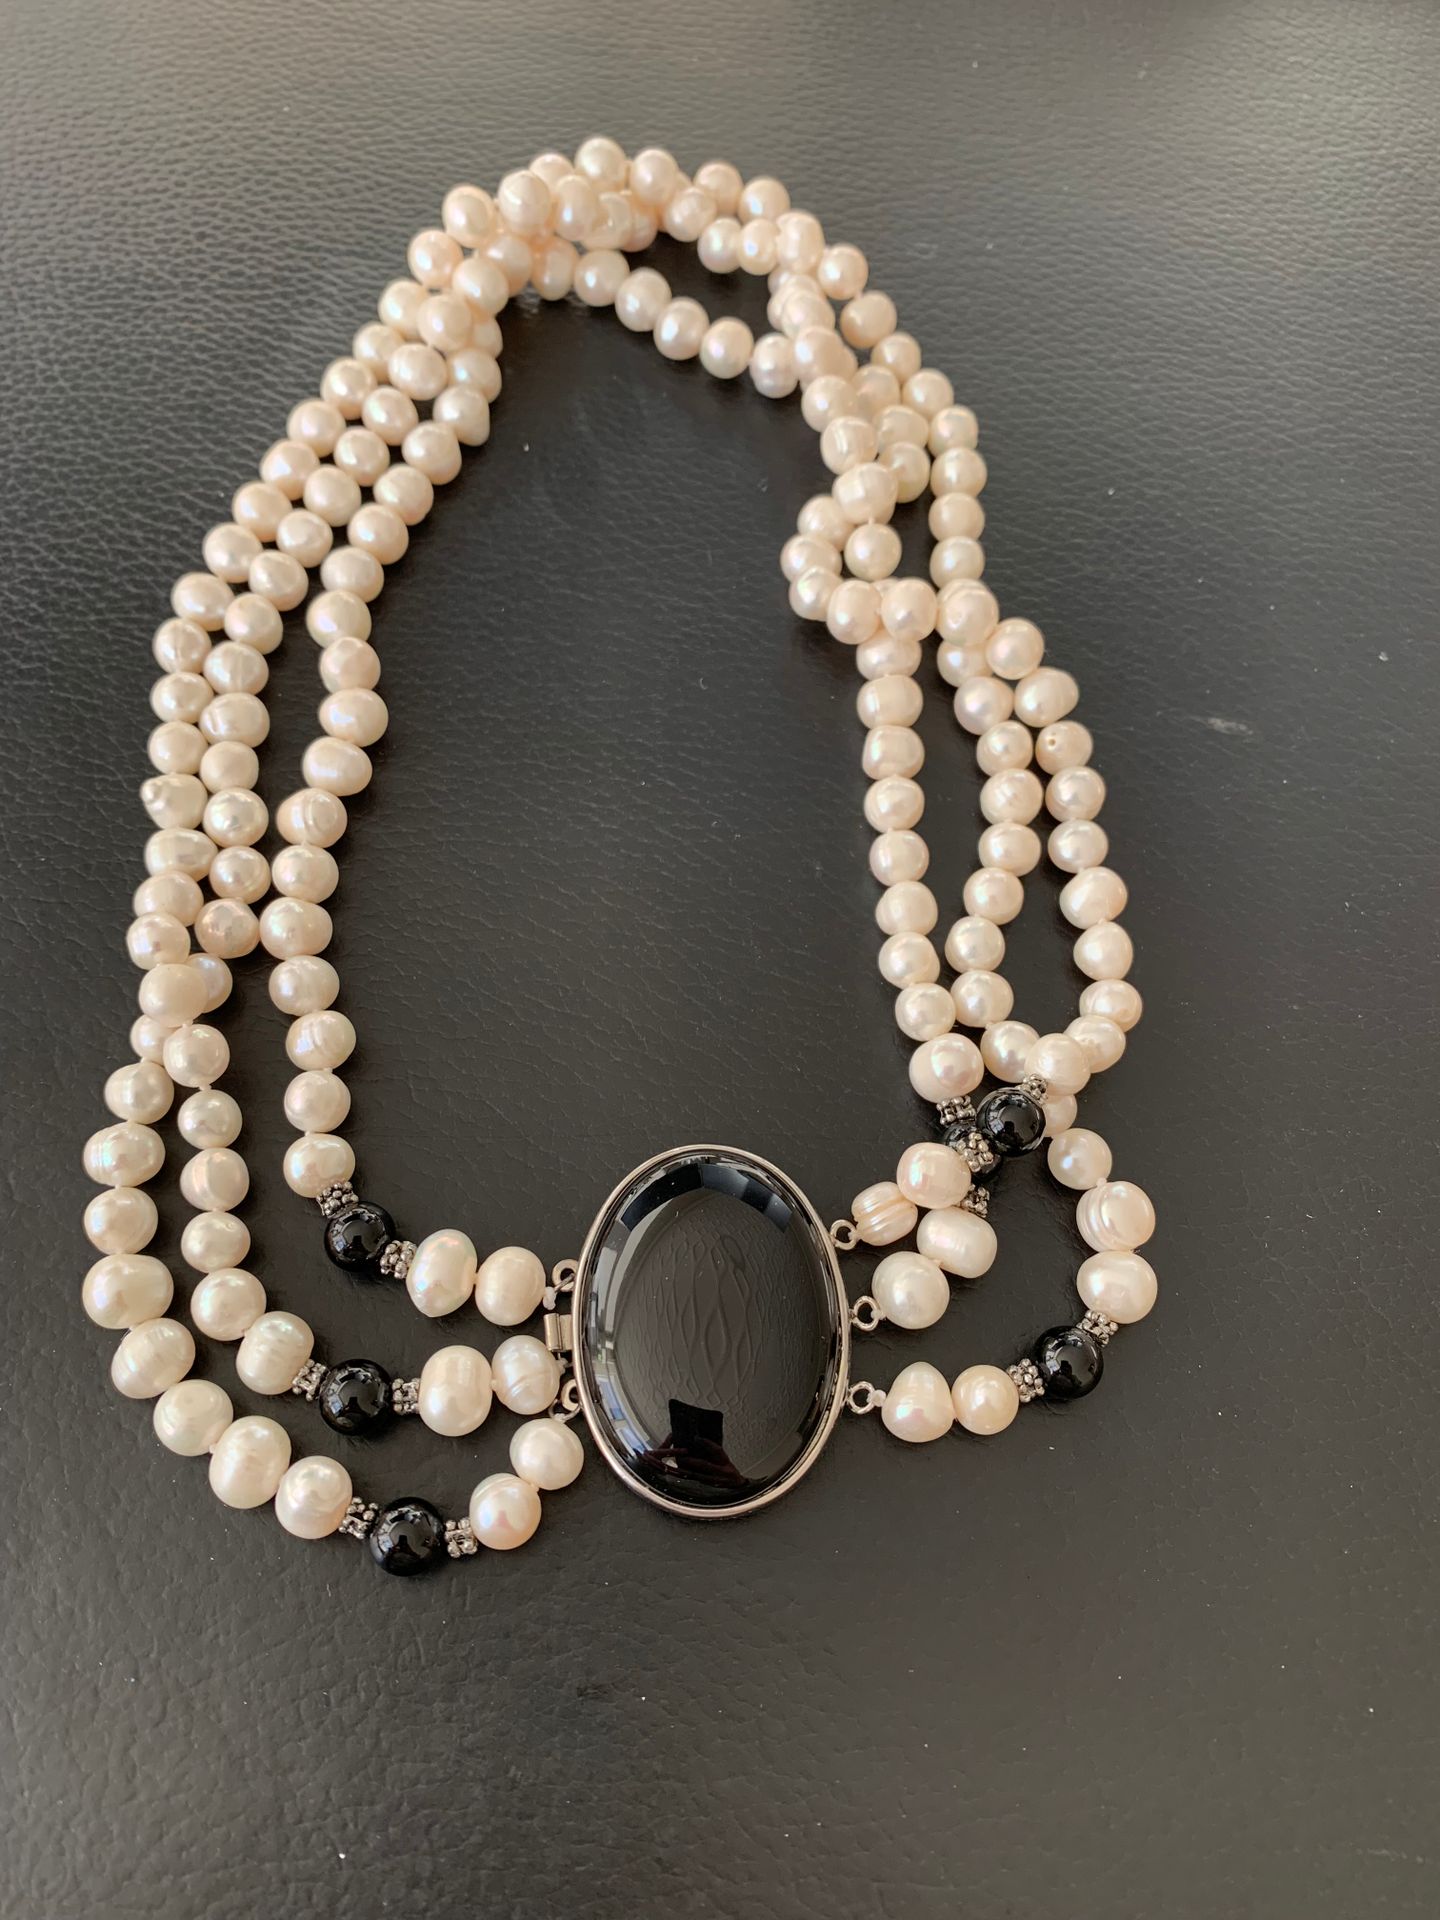 Null Necklace 3 rows of pearls with Onyx cabochon clasp